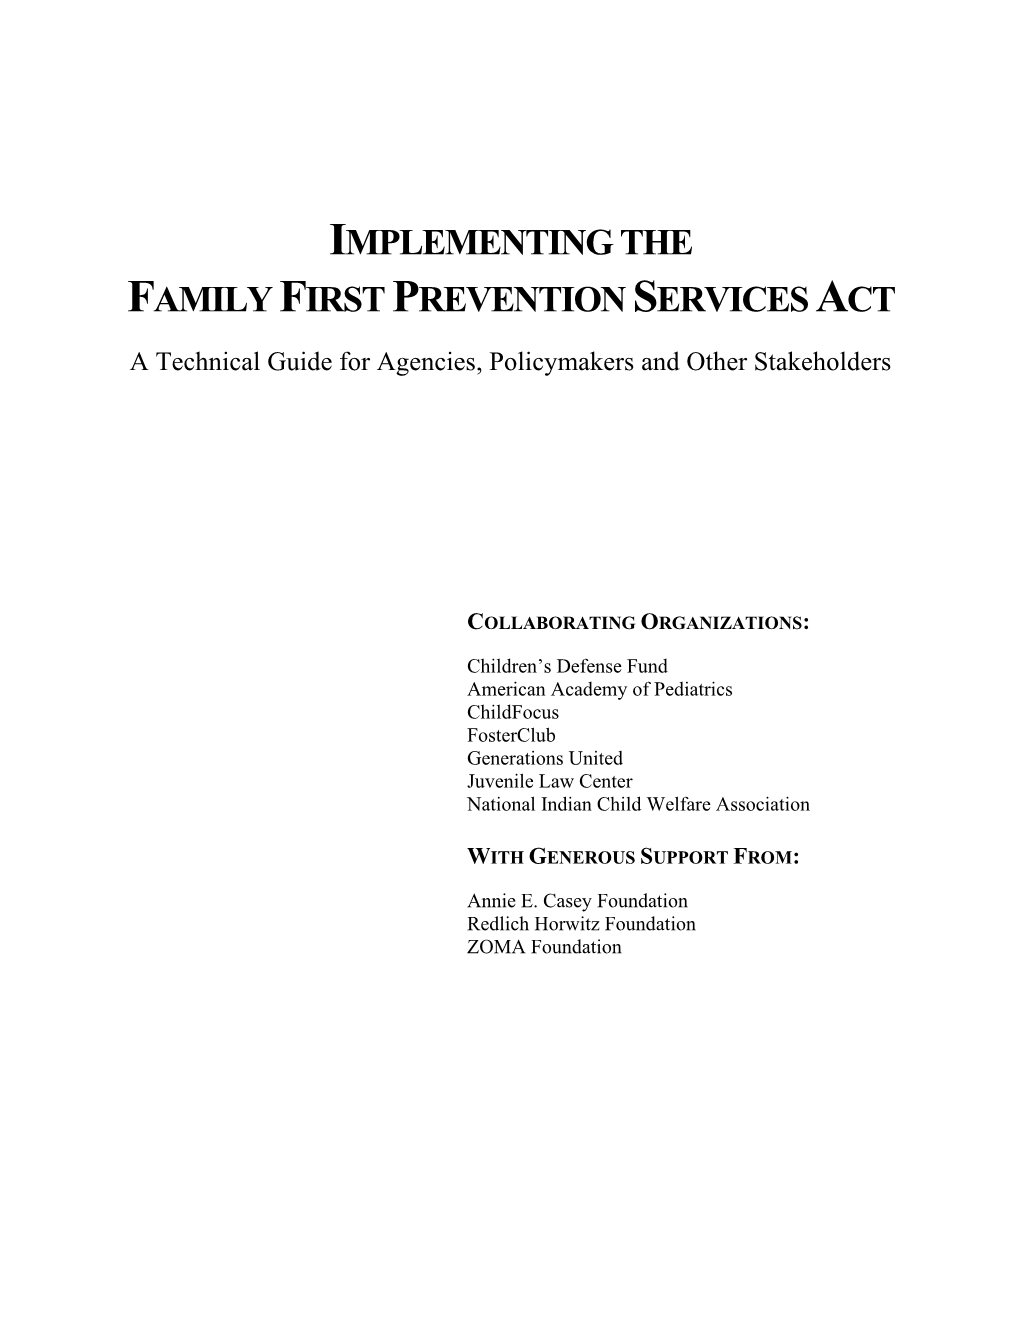 IMPLEMENTING the FAMILY FIRST PREVENTION SERVICES ACT a Technical Guide for Agencies, Policymakers and Other Stakeholders